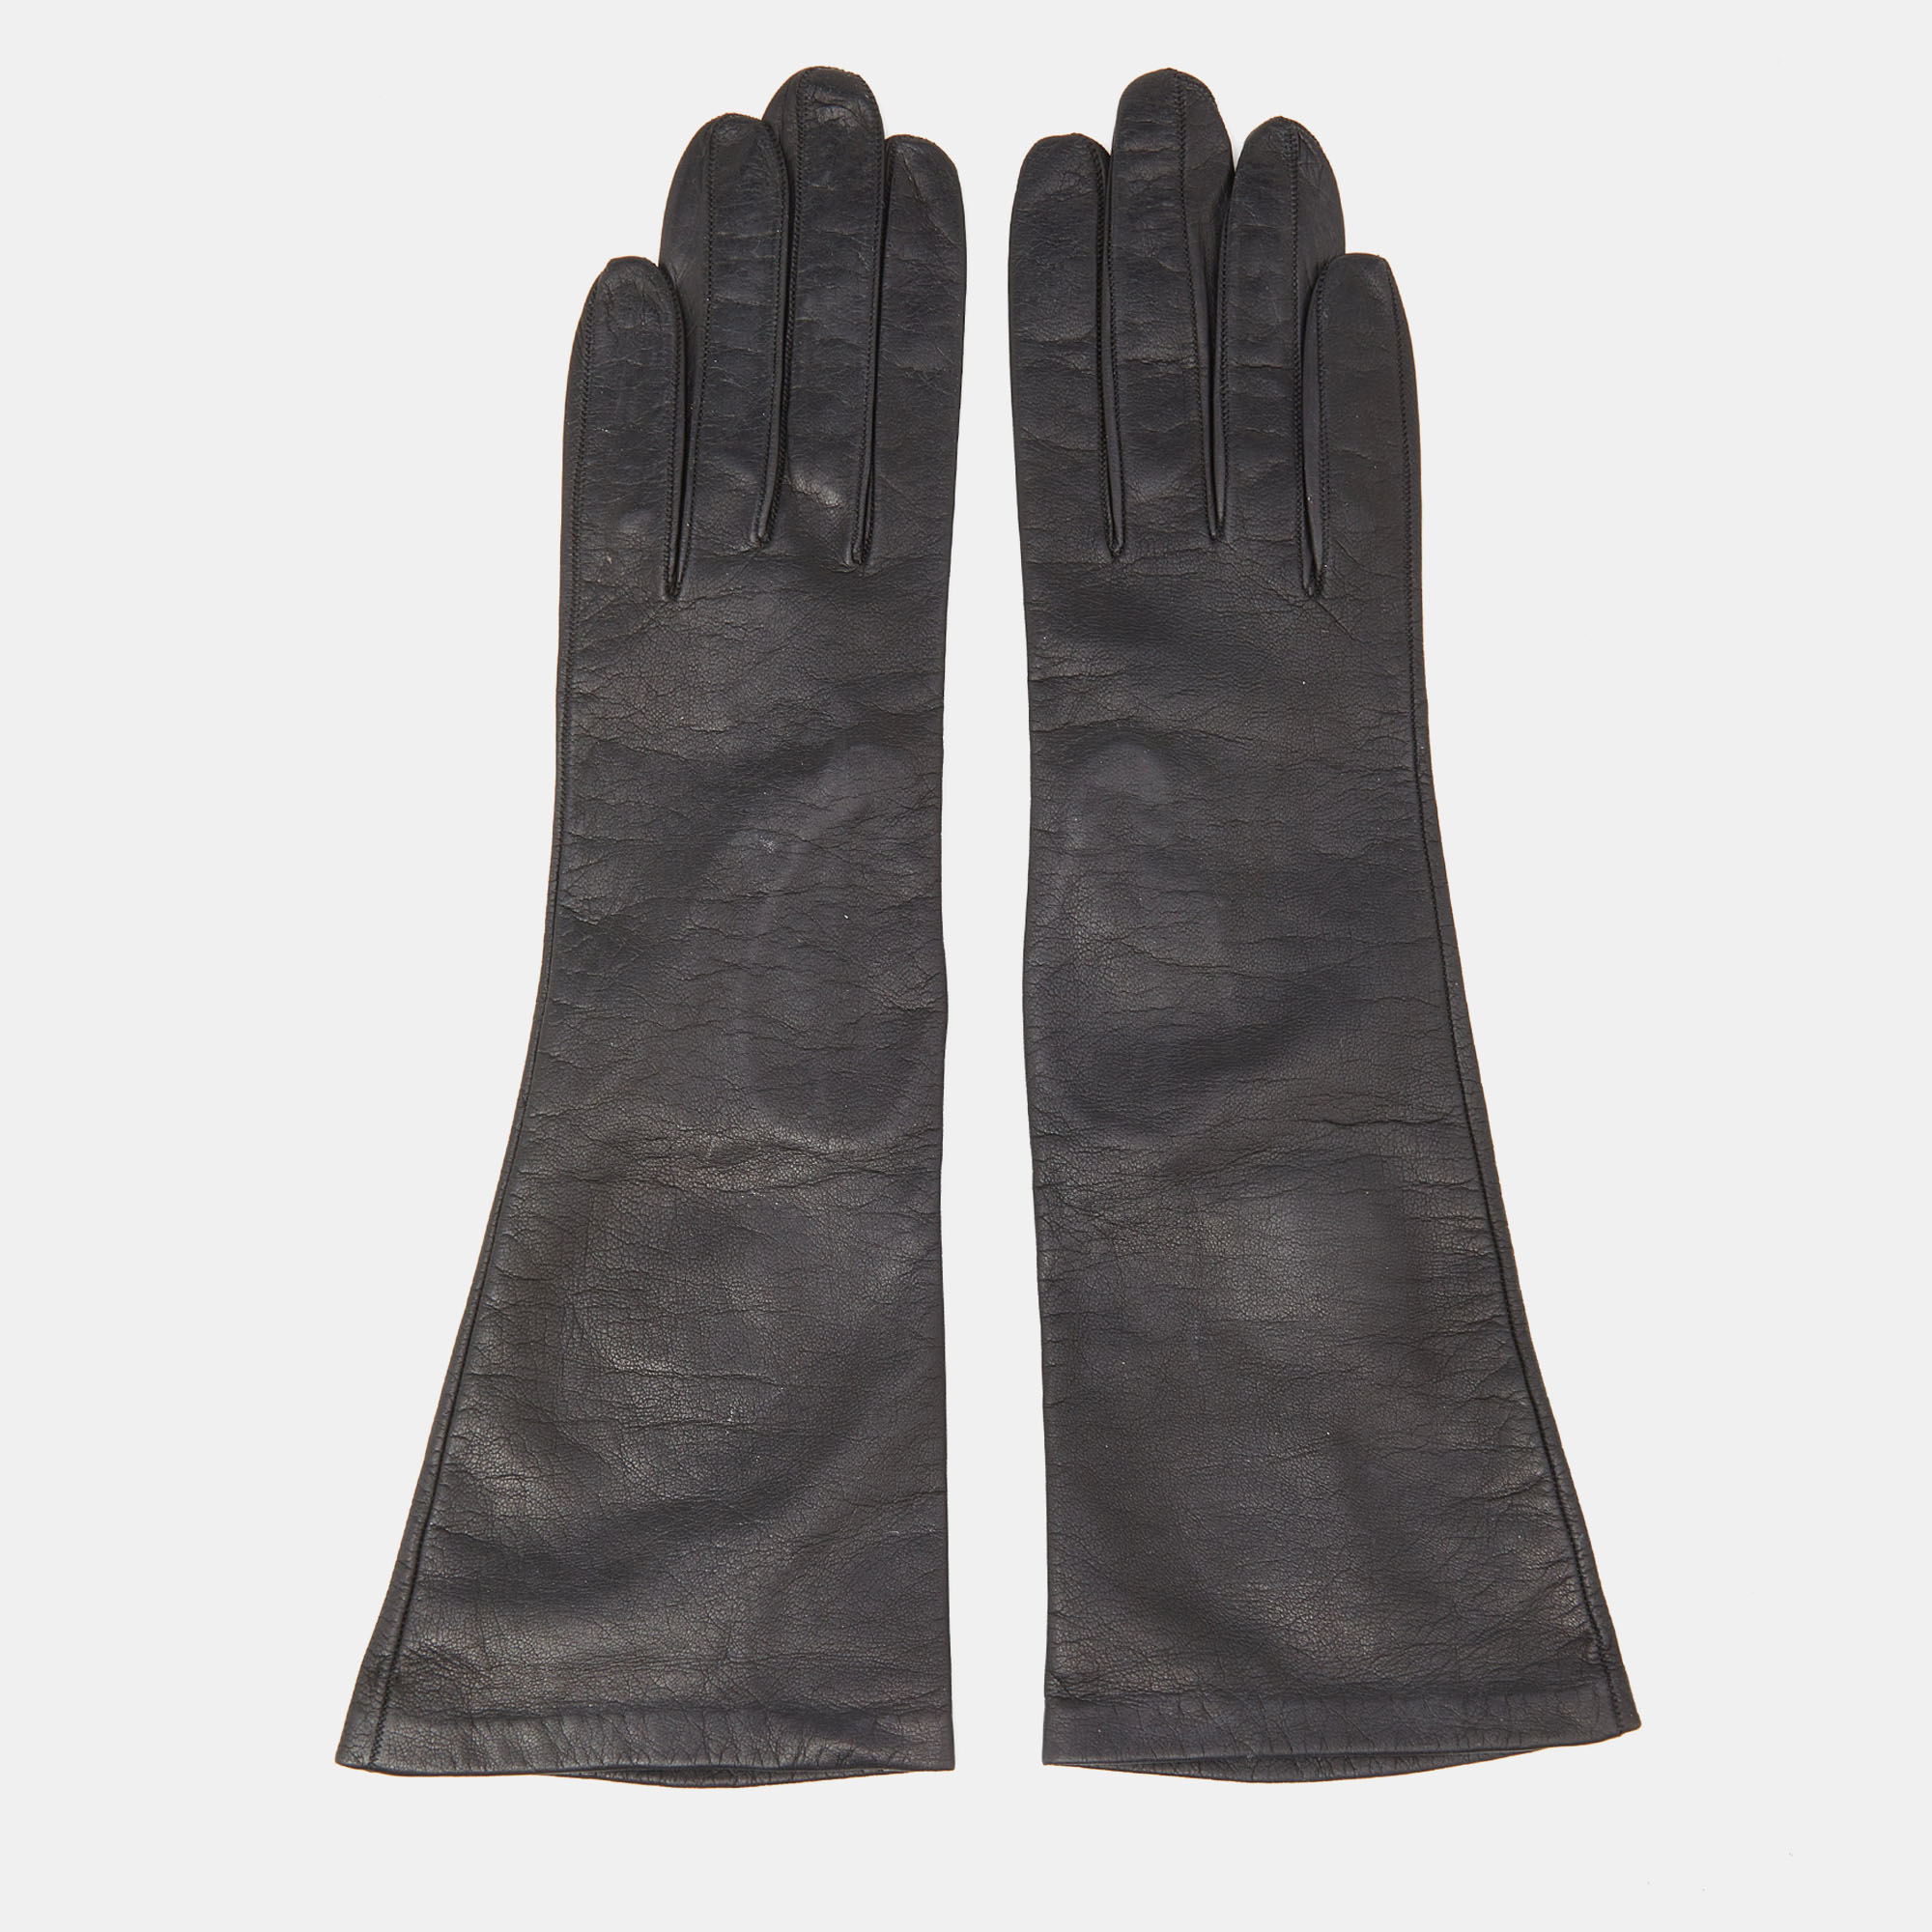 Dior ensures you have fun styling these gloves and wearing them often. Theyre made of high quality leather in a classy black to be a versatile choice.